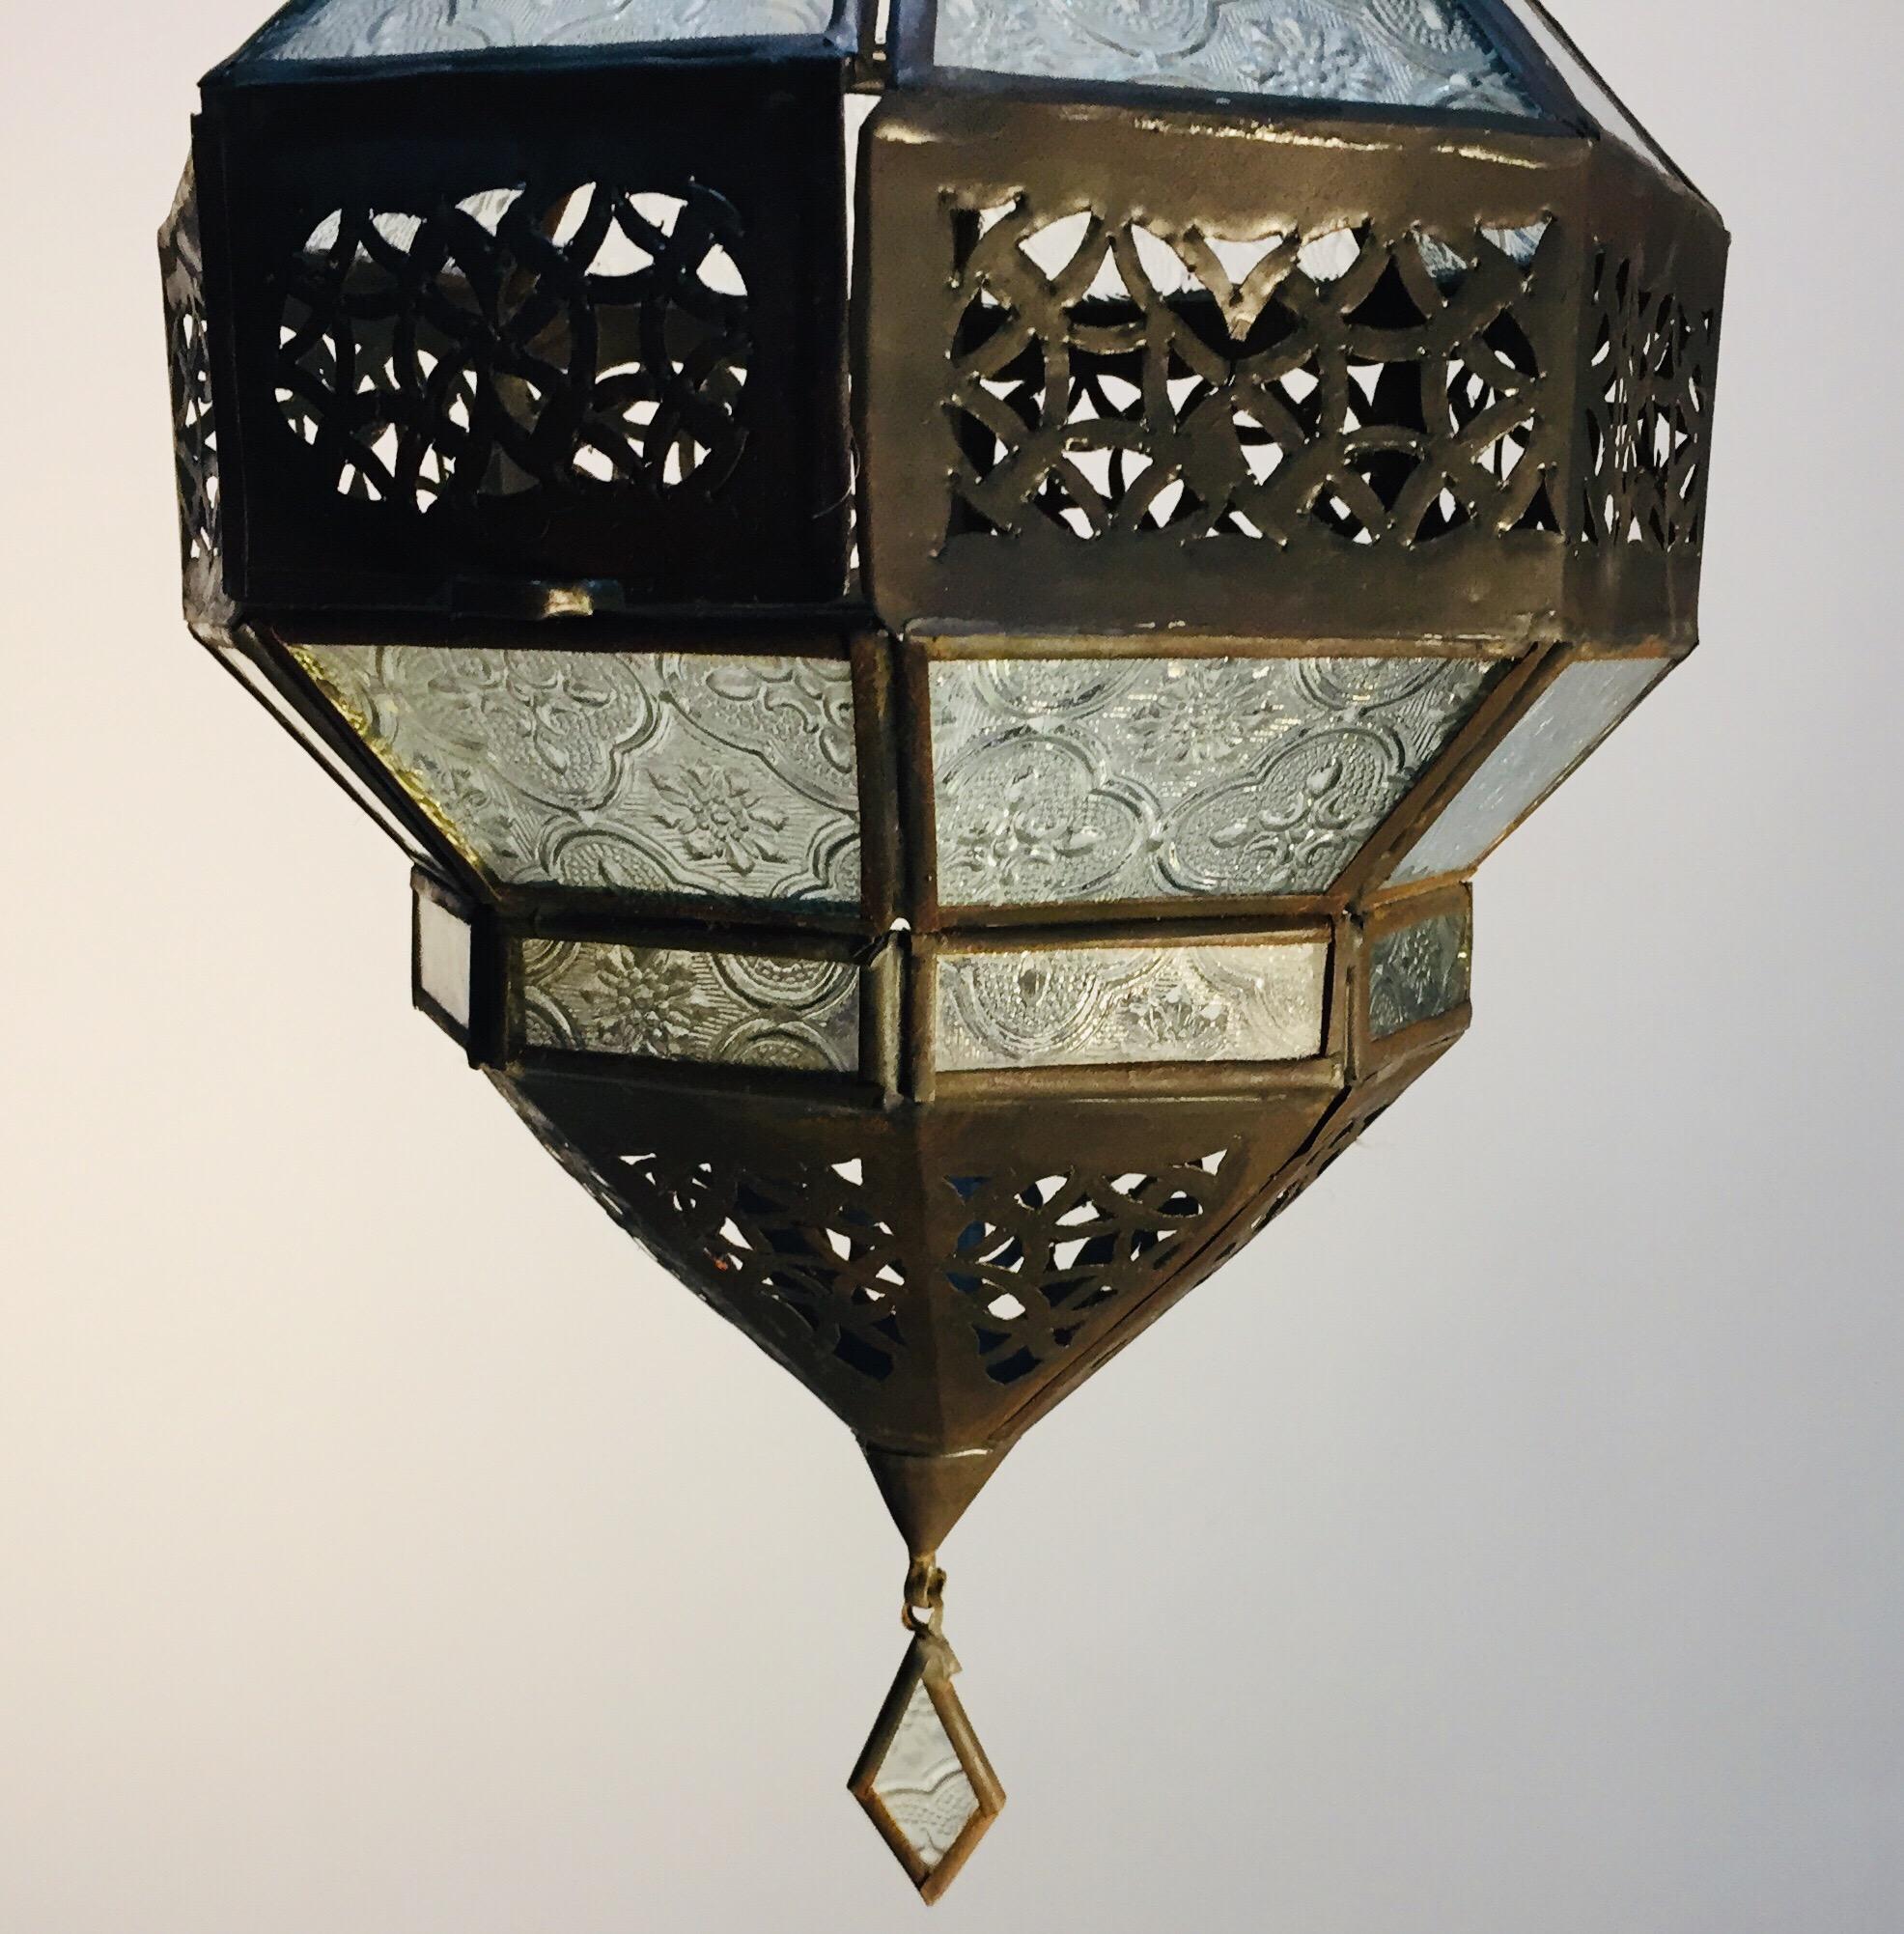 Handcrafted Moroccan Metal Lantern, Octagonal Shape with Clear Glass 14